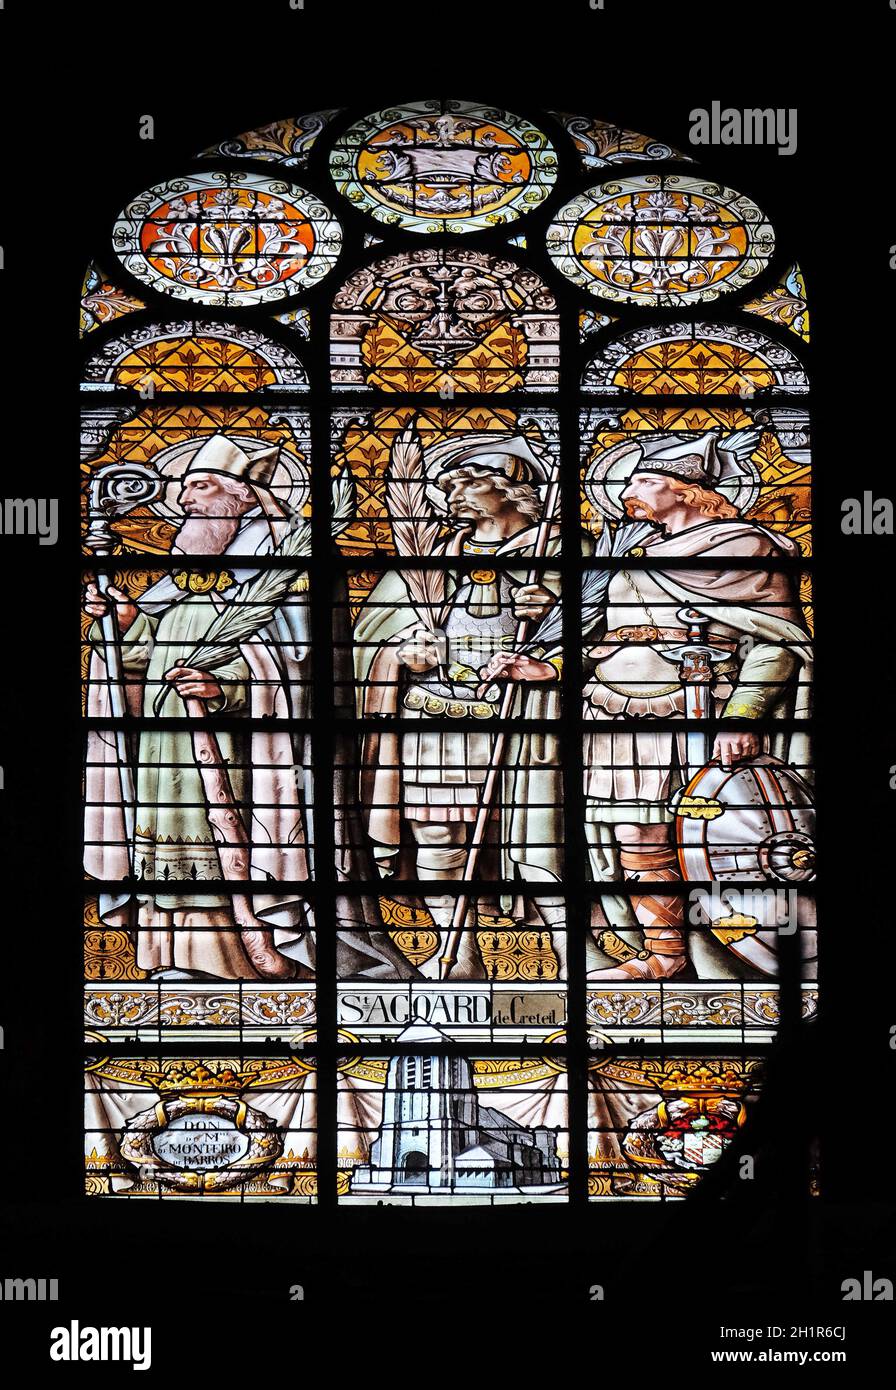 Saint Agoard of Creteil, stained glass window in the Saint Augustine church in Paris, France Stock Photo